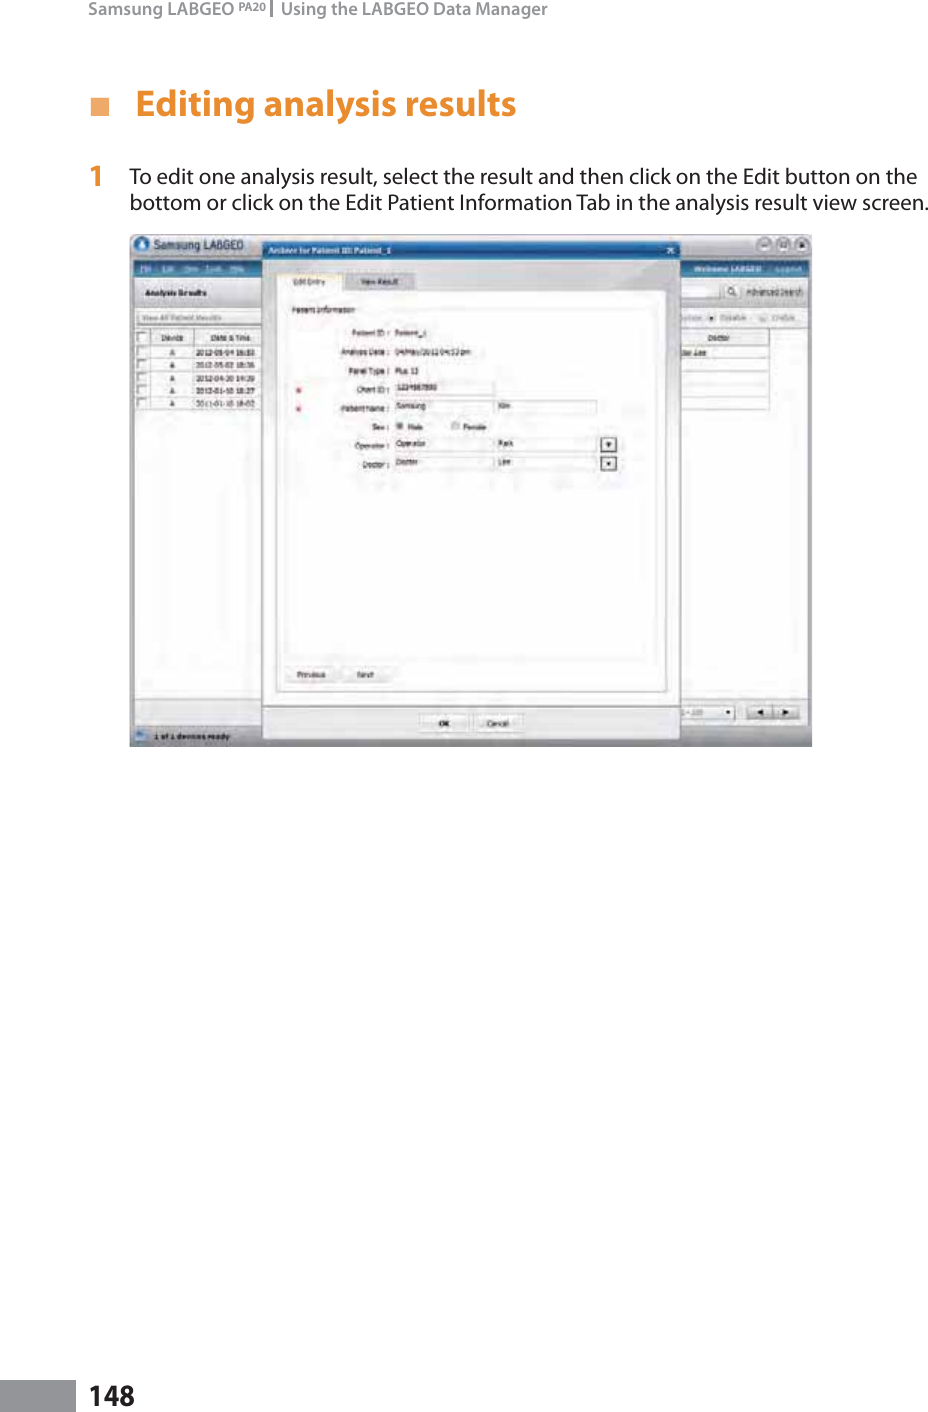 148Samsung LABGEO PA20   Using the LABGEO Data Manager ŶEditing analysis results1  To edit one analysis result, select the result and then click on the Edit button on the bottom or click on the Edit Patient Information Tab in the analysis result view screen.